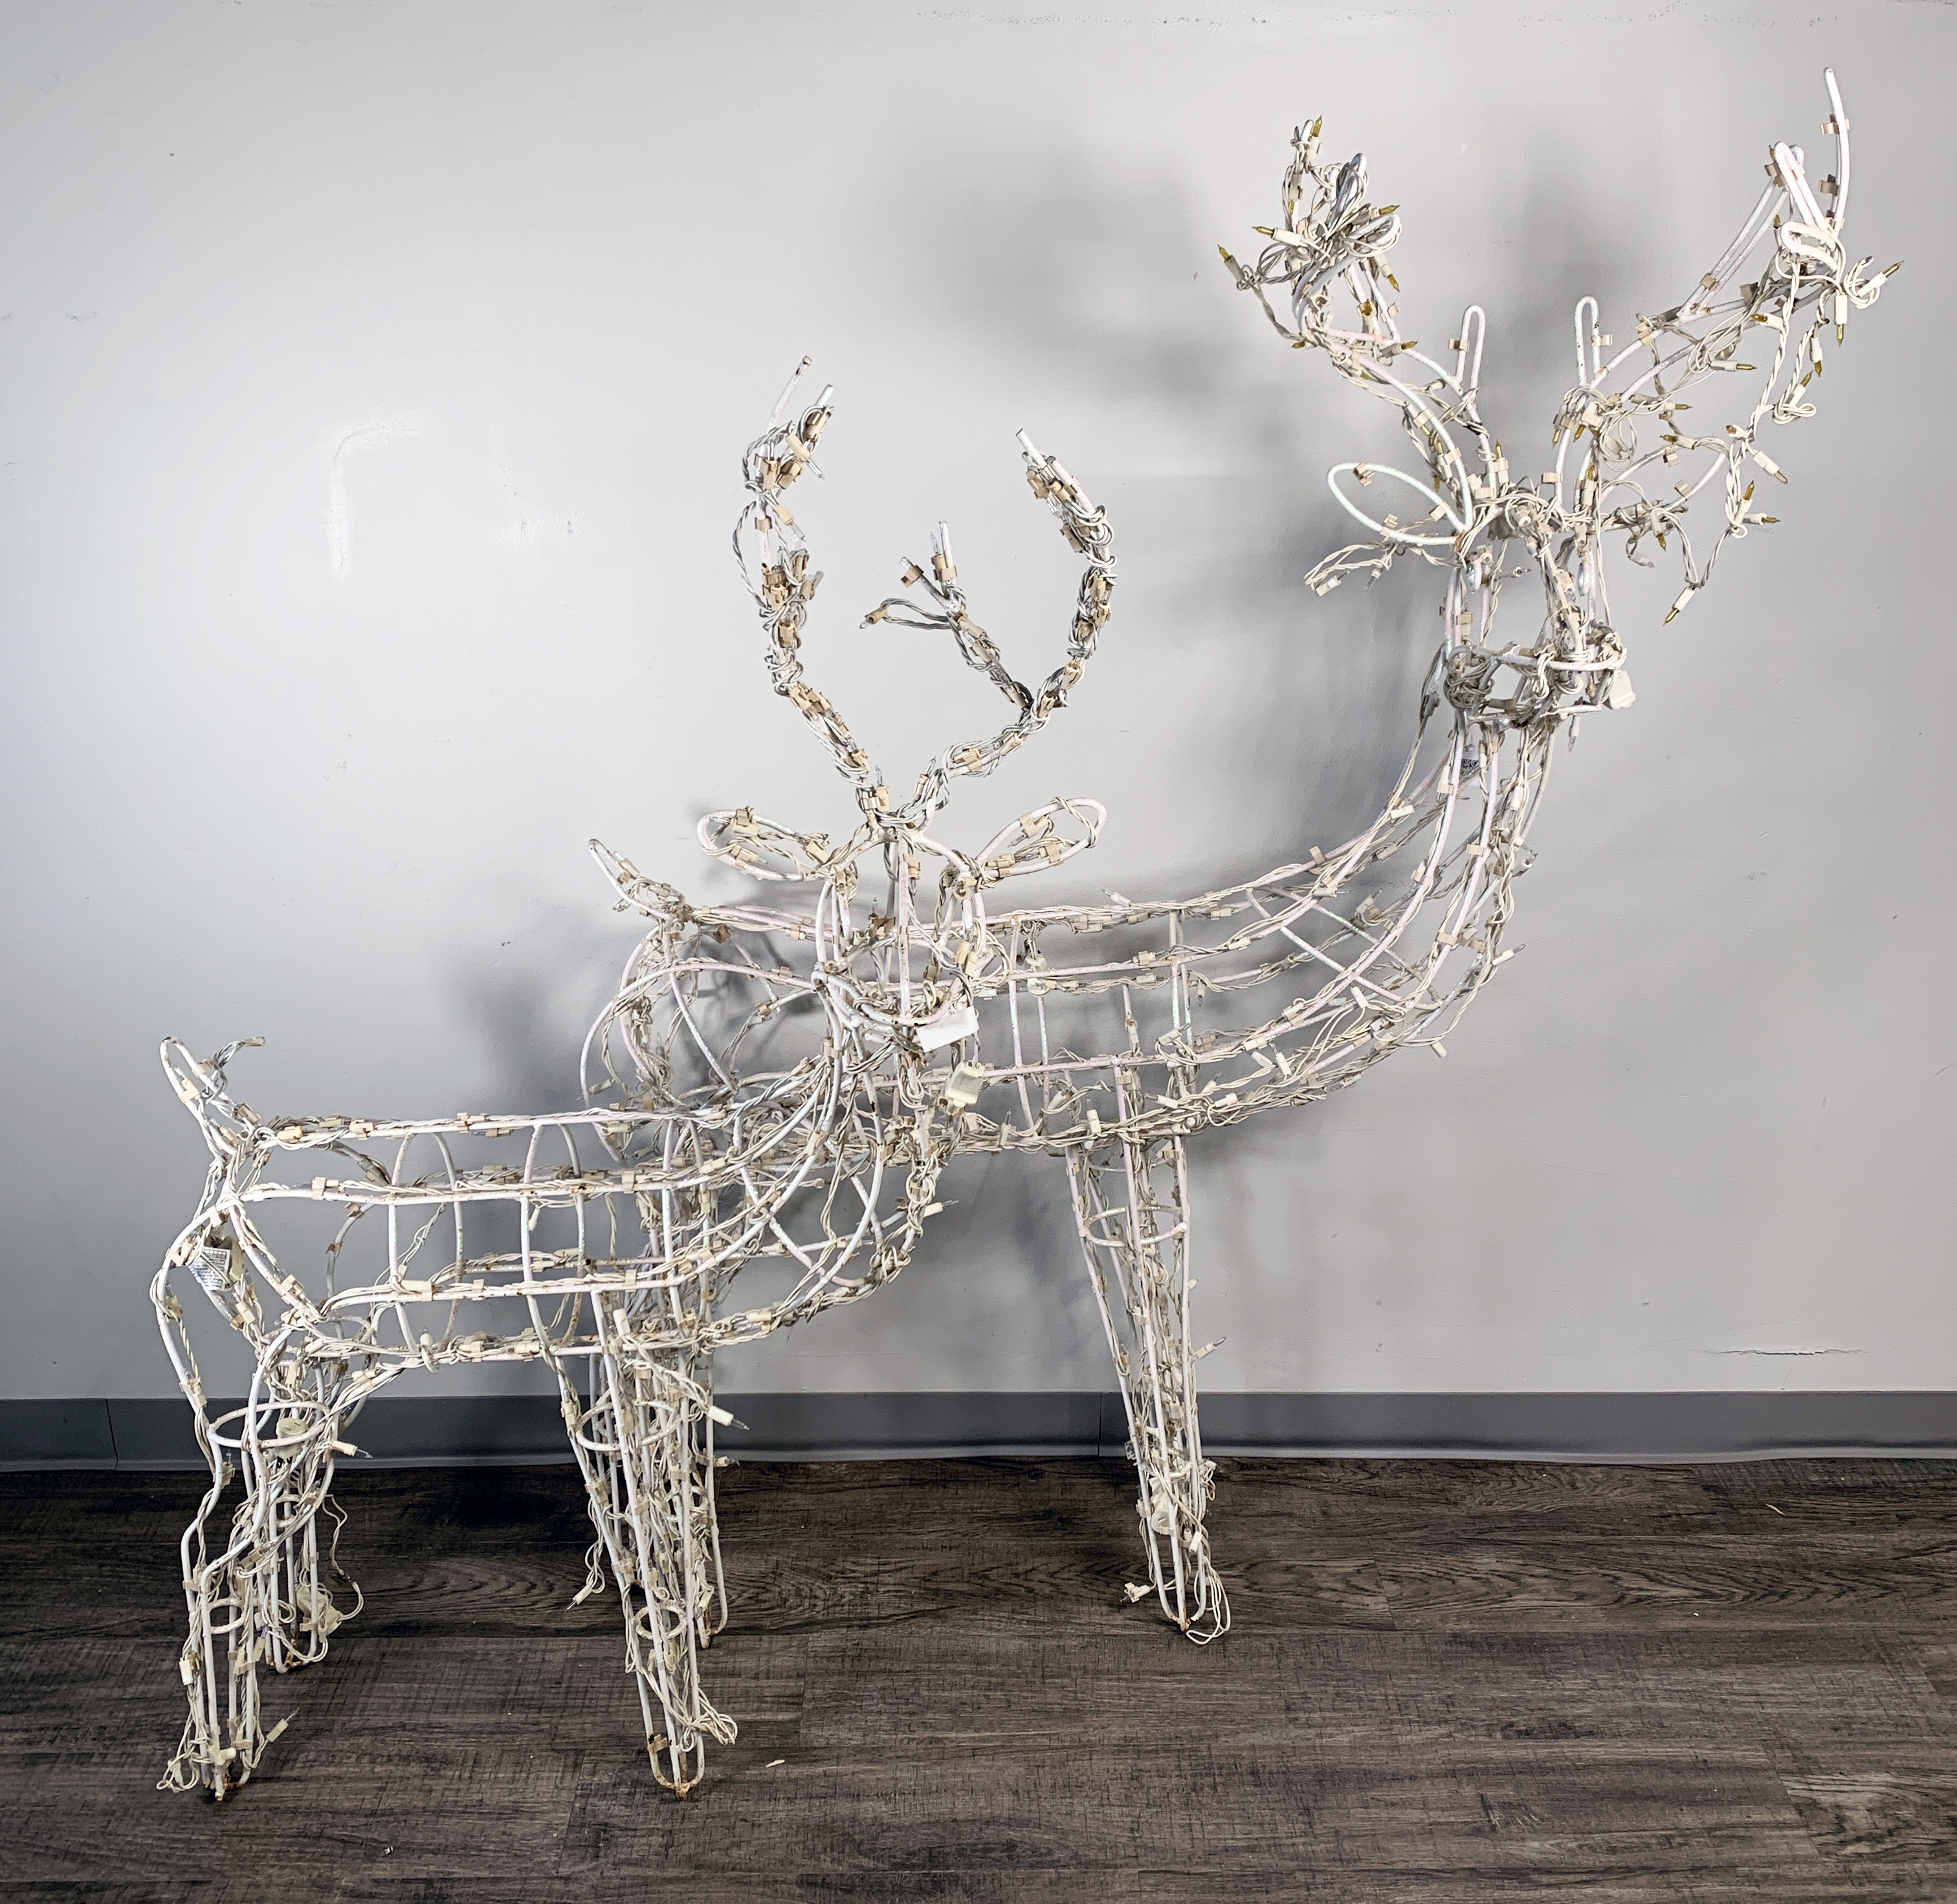 2 Light Up Wrought Iron Reindeer Lawn Ornaments  image 1